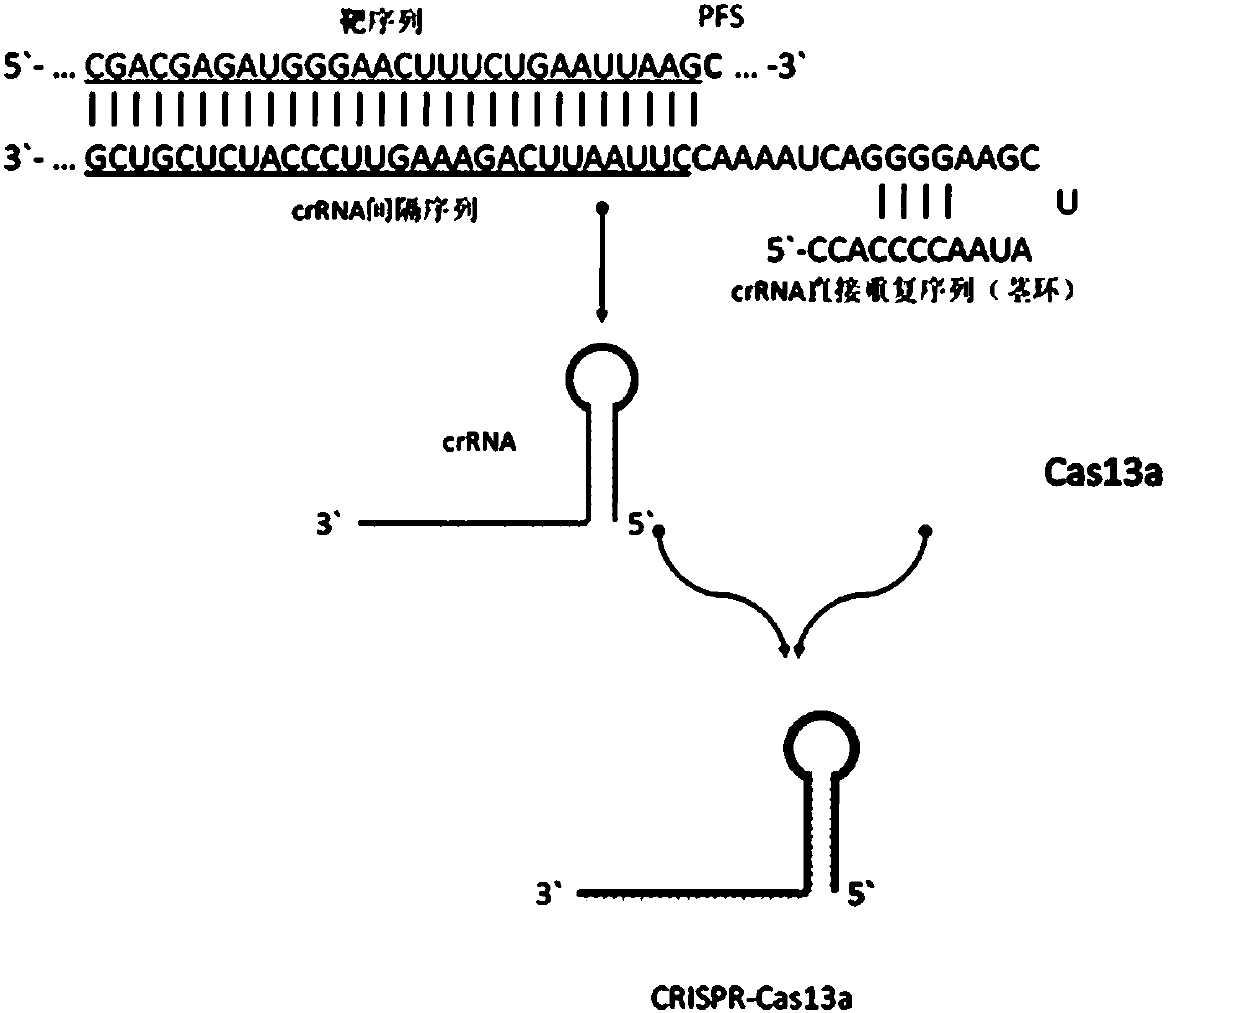 CrRNA specifically targeting toward human RSPO2 gene in CRISPR-Cas13a system and system and application